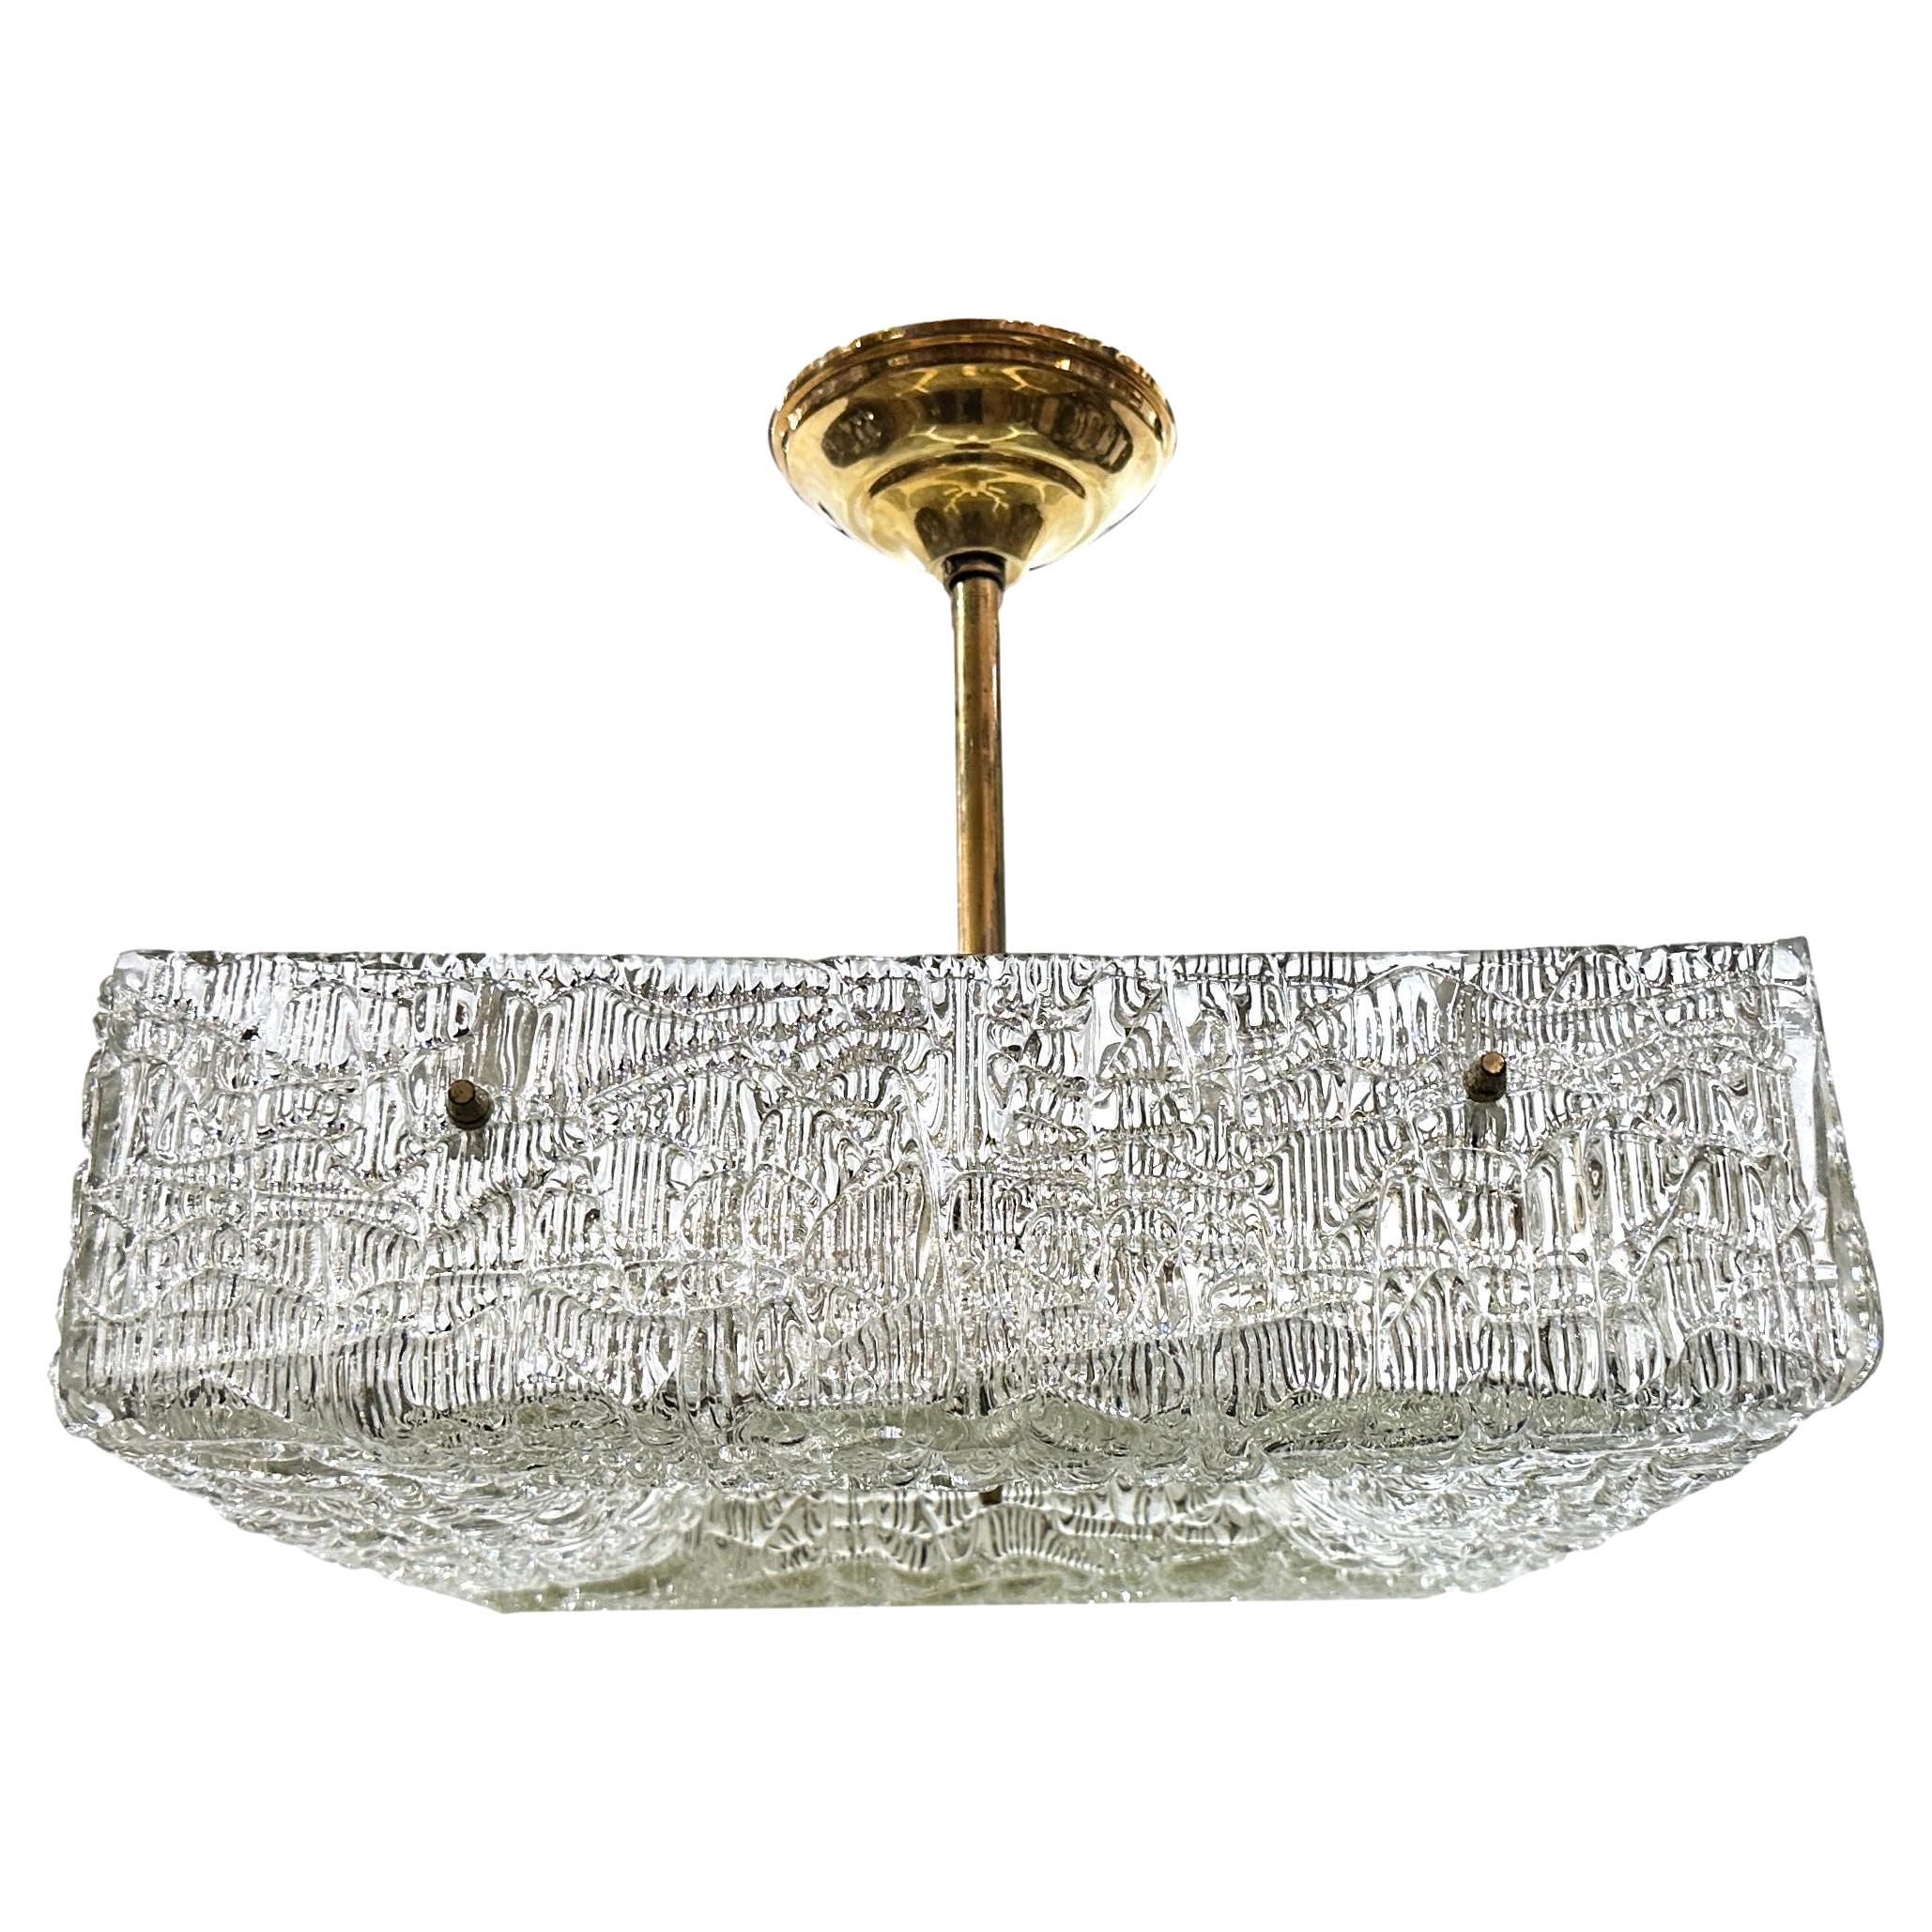 Midcentury Swedish Glass Square Light Fixture For Sale